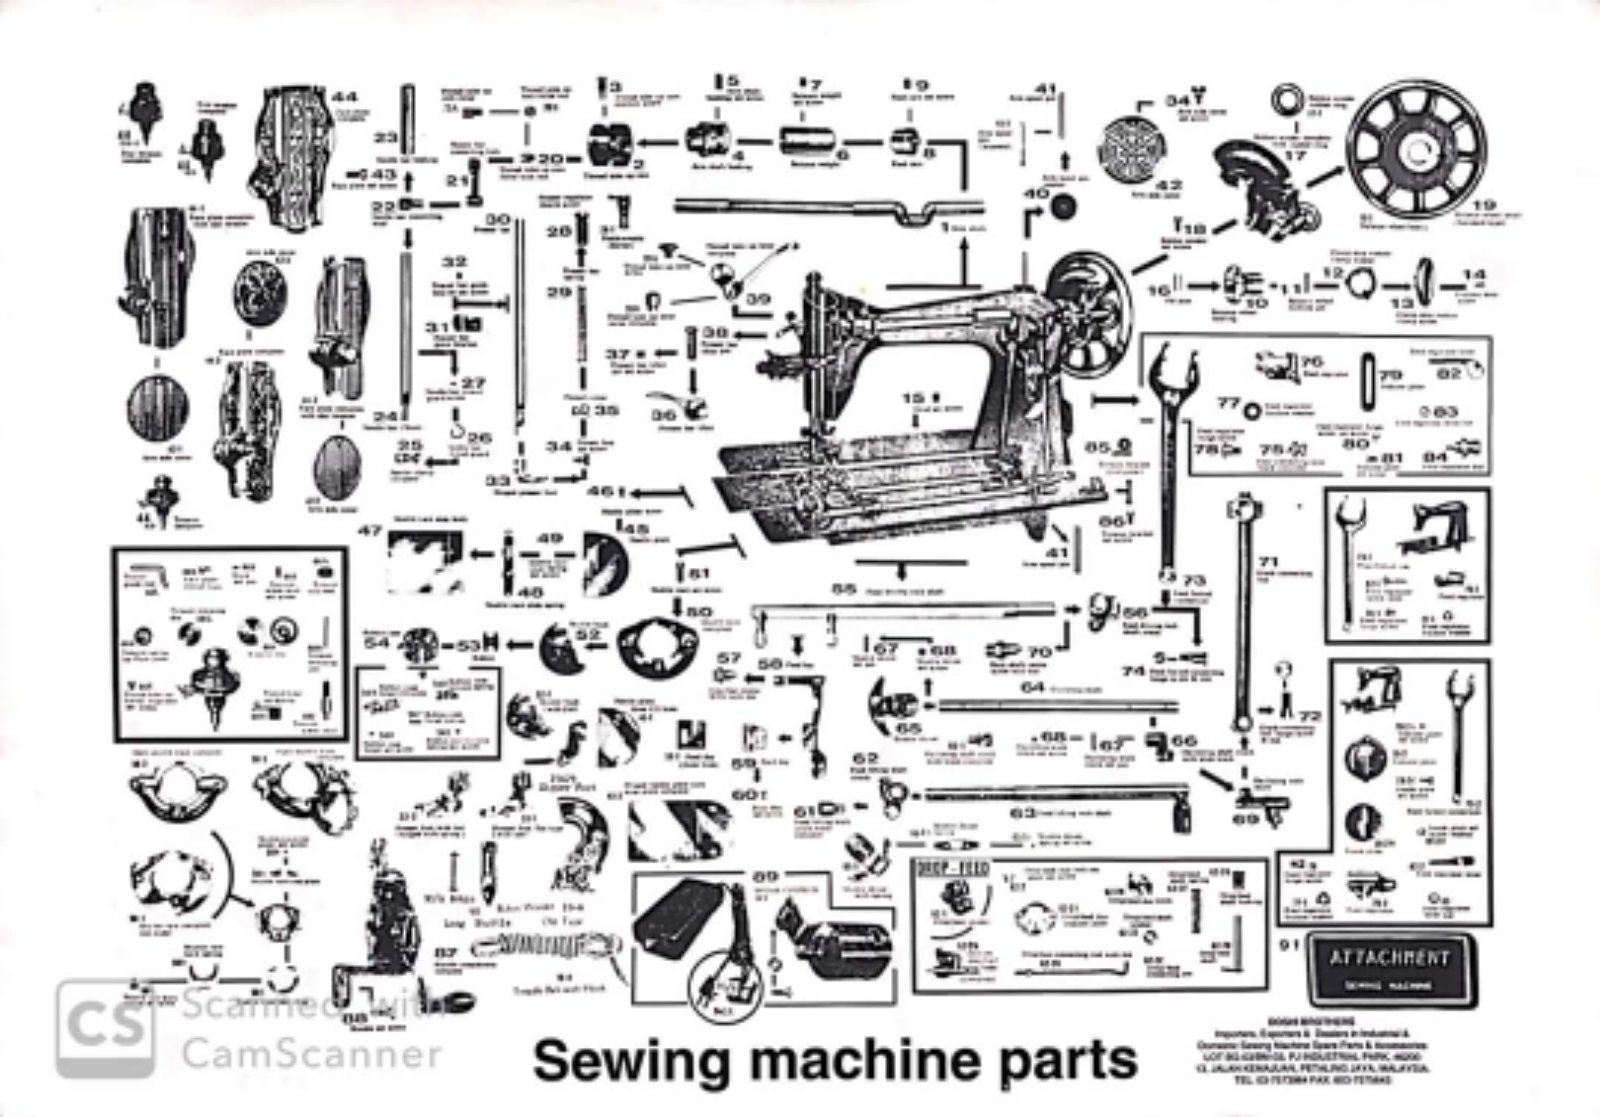 Your want Find This sewing machine part 